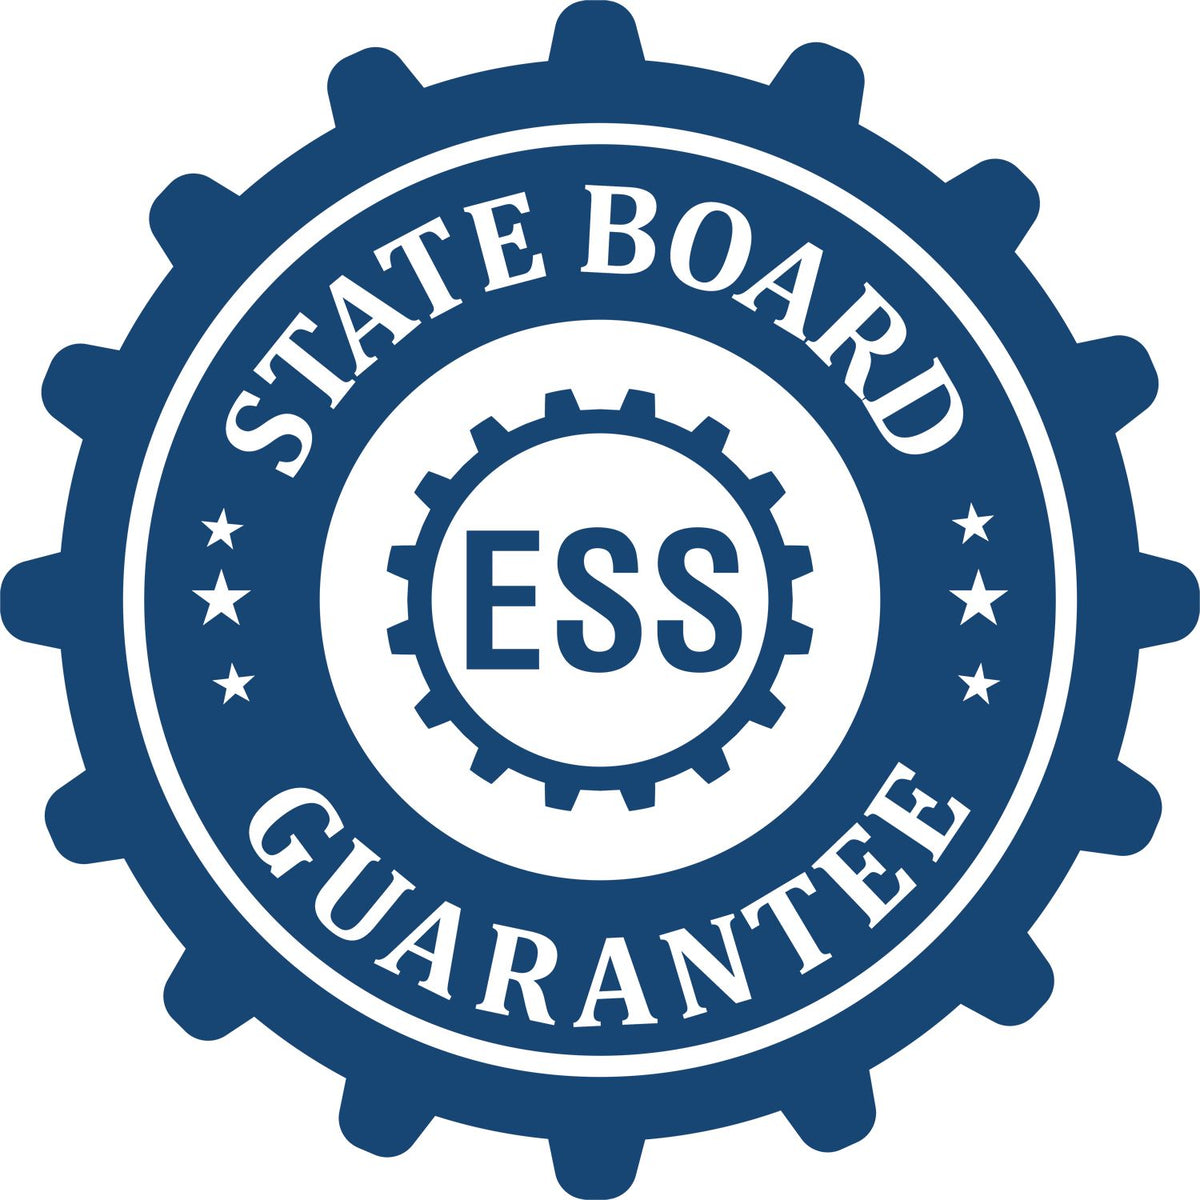 An emblem in a gear shape illustrating a state board guarantee for the Virginia Professional Engineer Seal Stamp product.